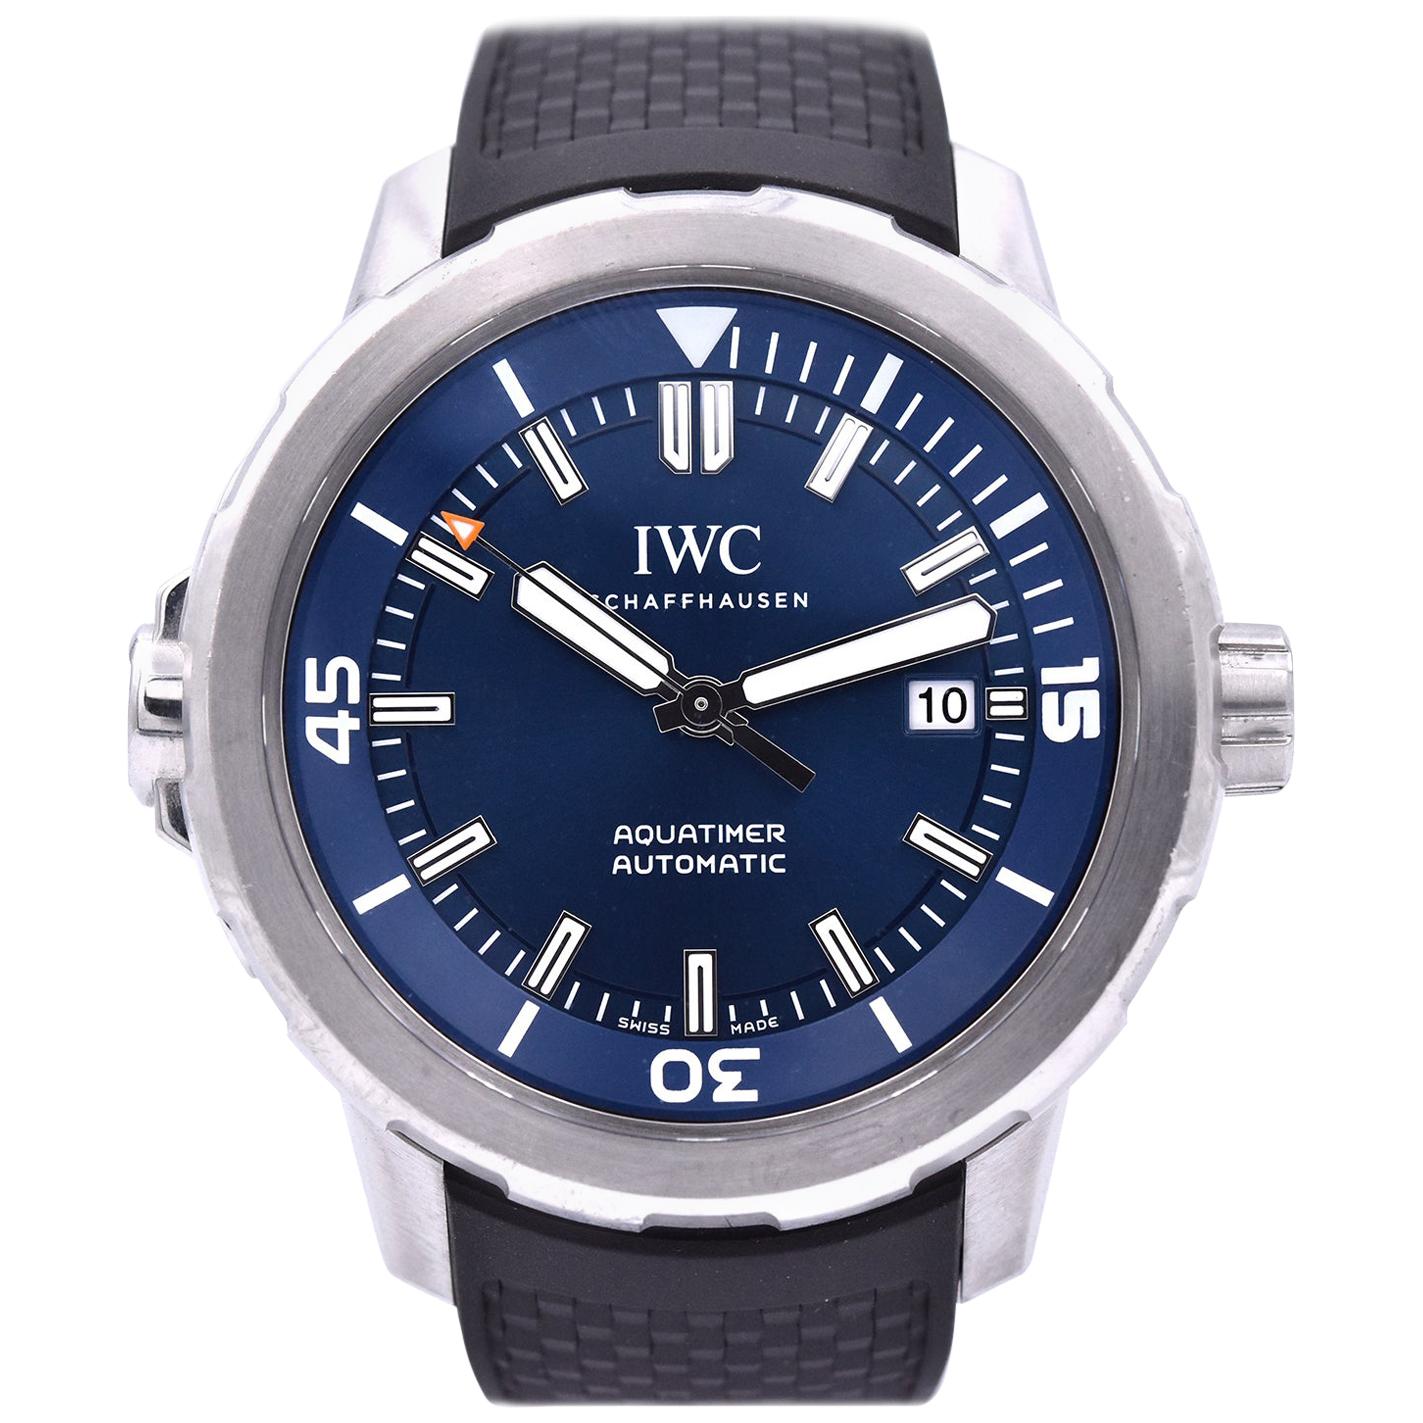 IWC Aquatimer Blue Expedition Jacques-Yves Cousteau Watch Ref. IW329005